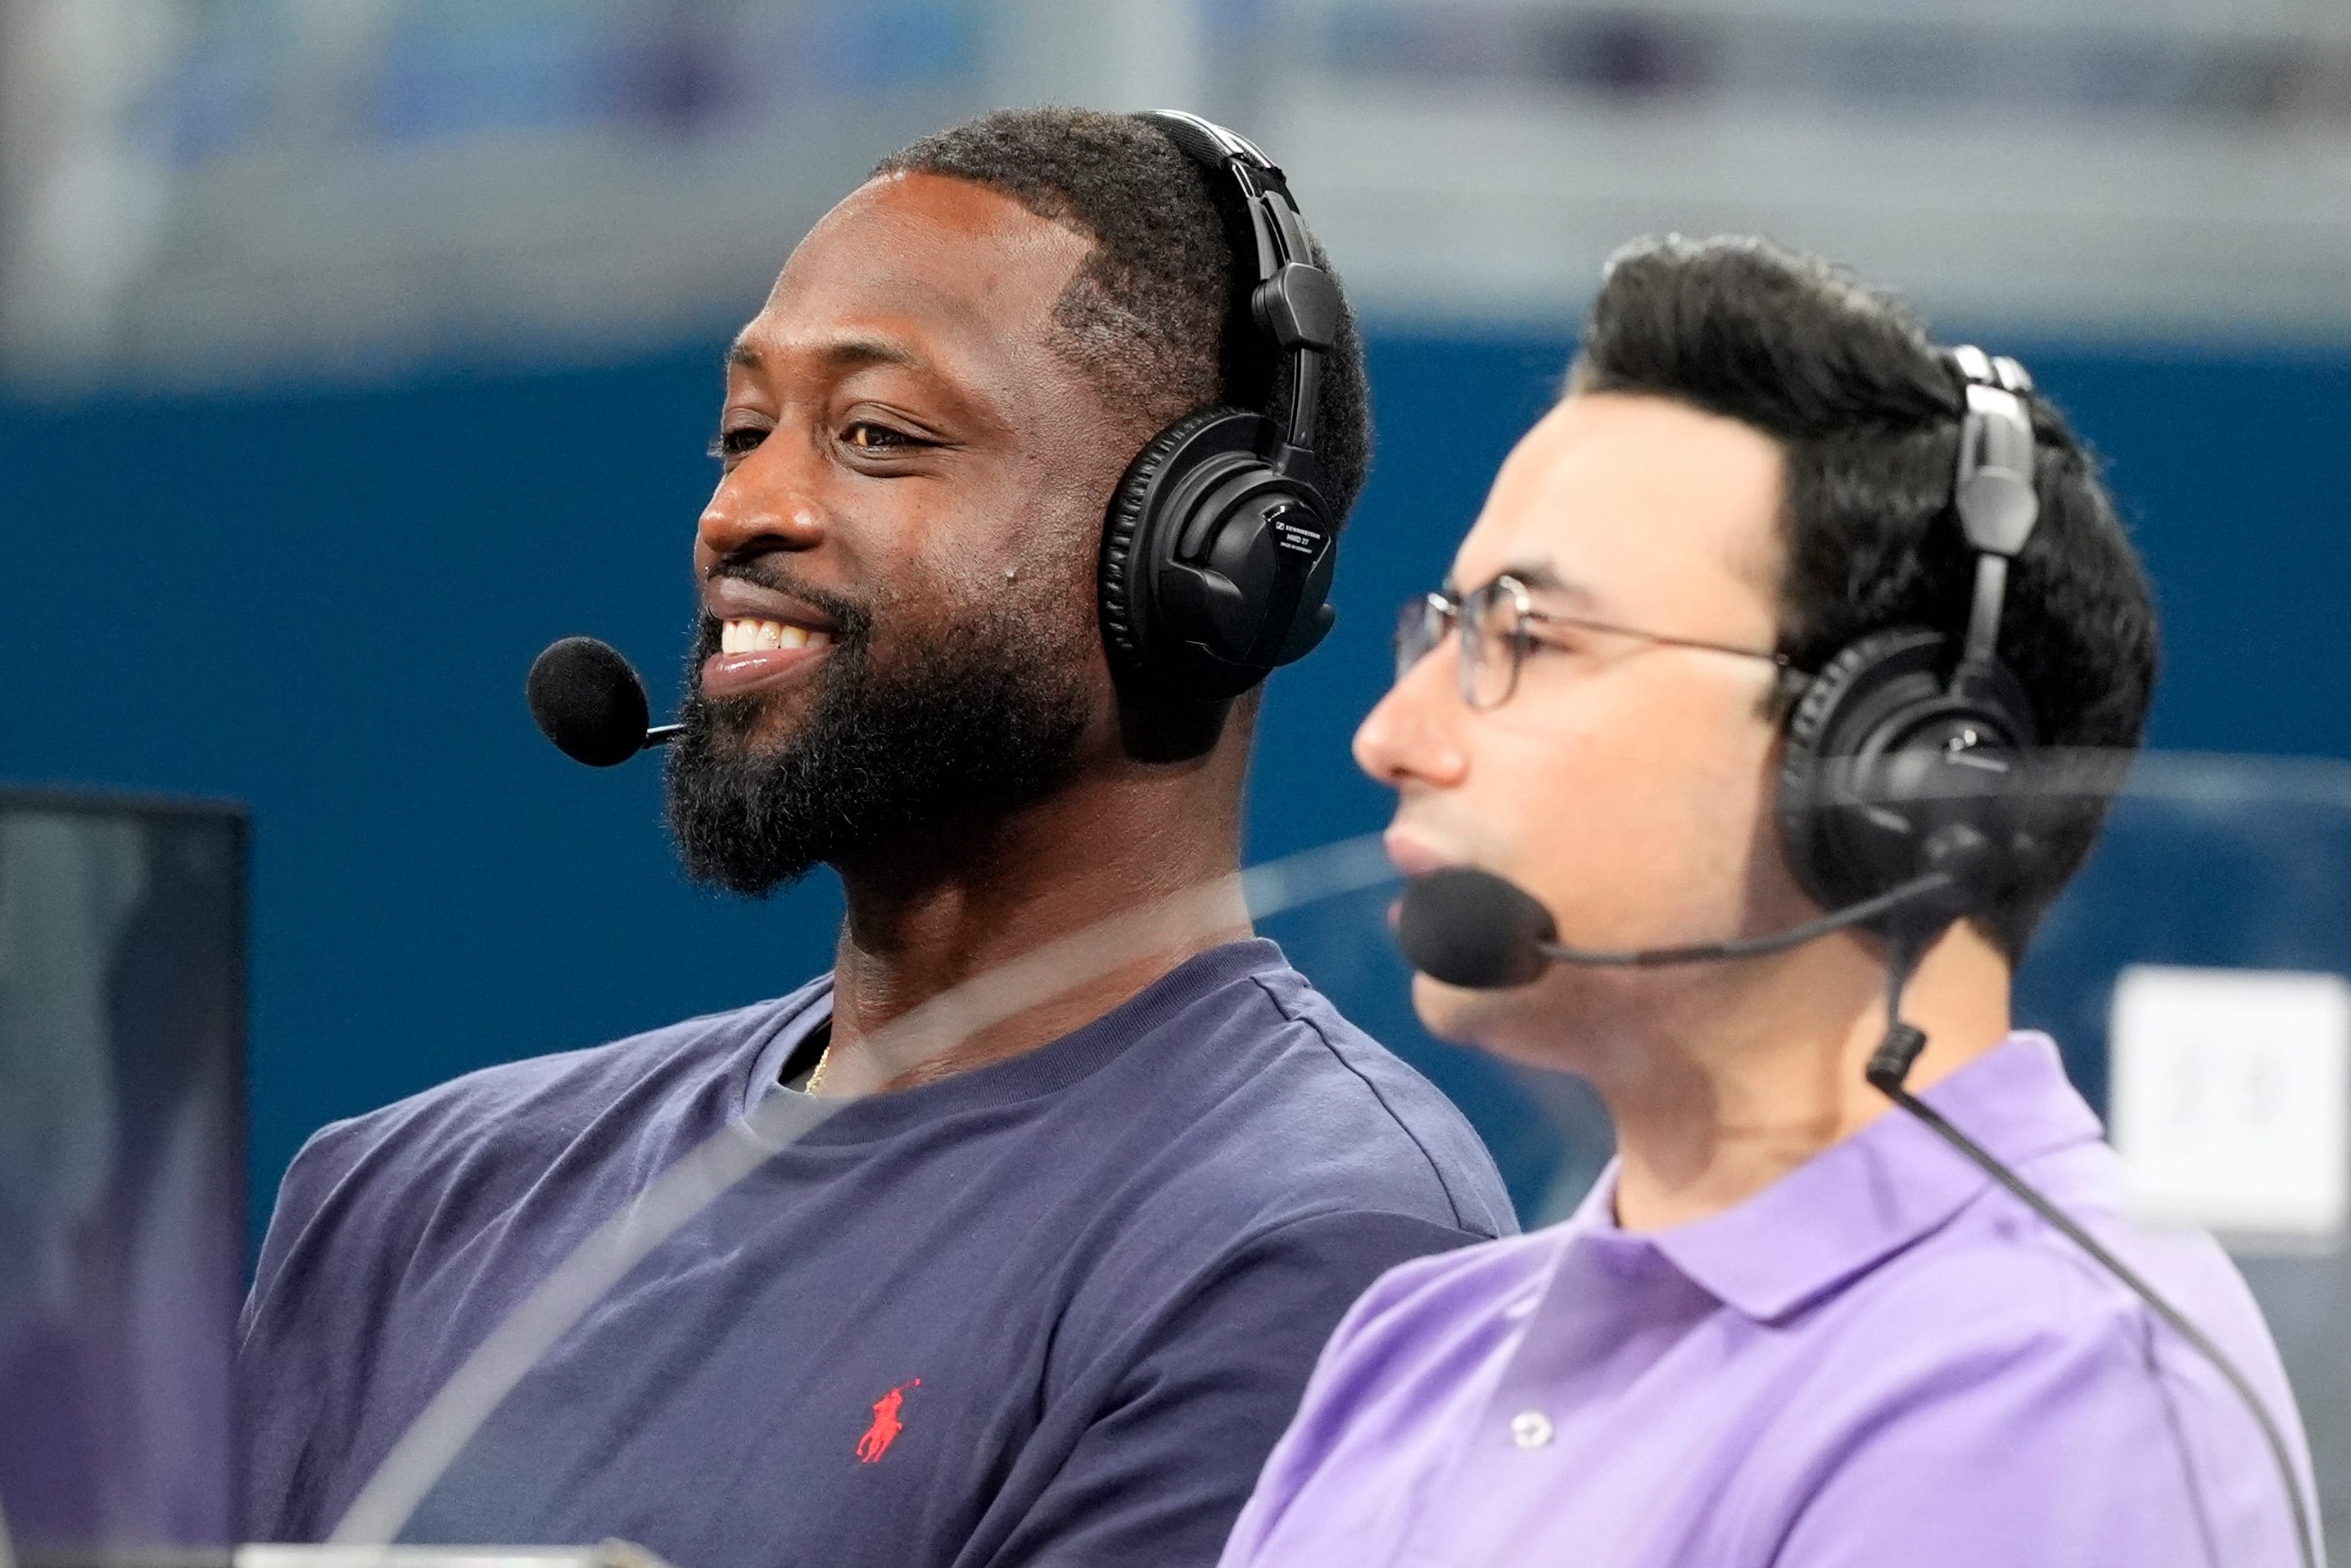 Dwyane Wade's Olympic broadcasts showing he could be future of NBC hoops